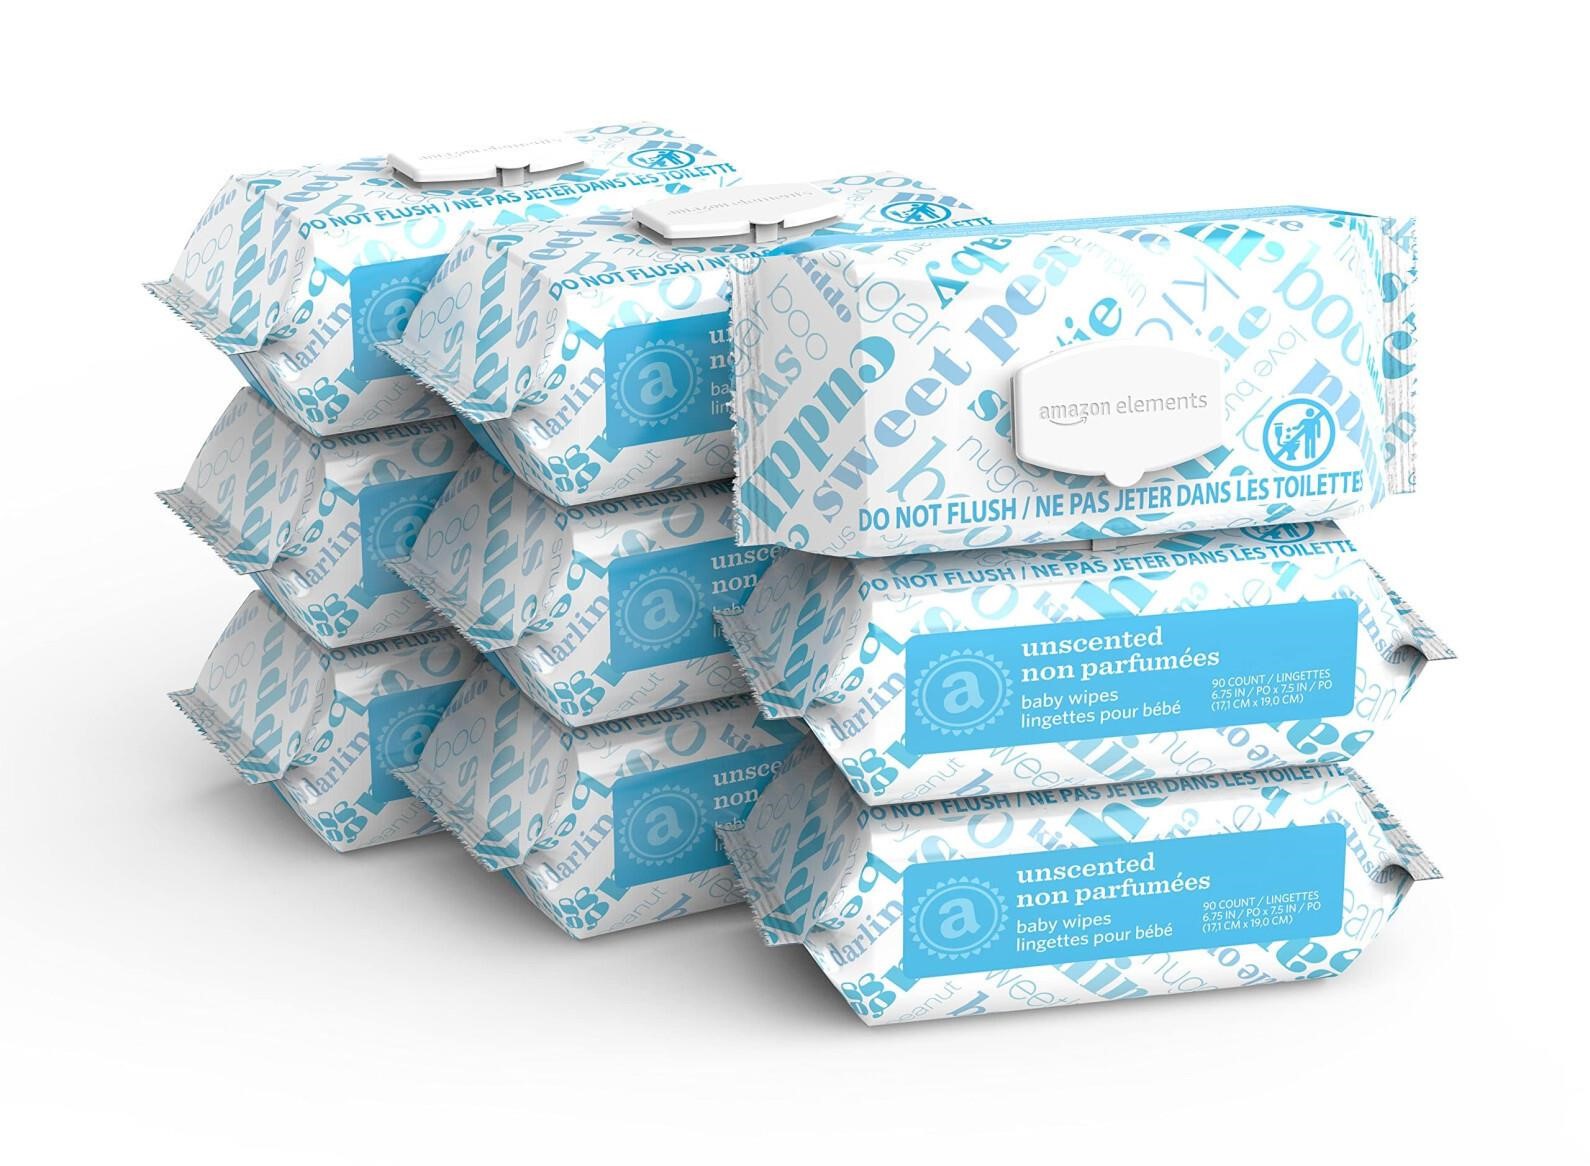 Amazon Elements Baby Wipes, Unscented, Hypoallerge